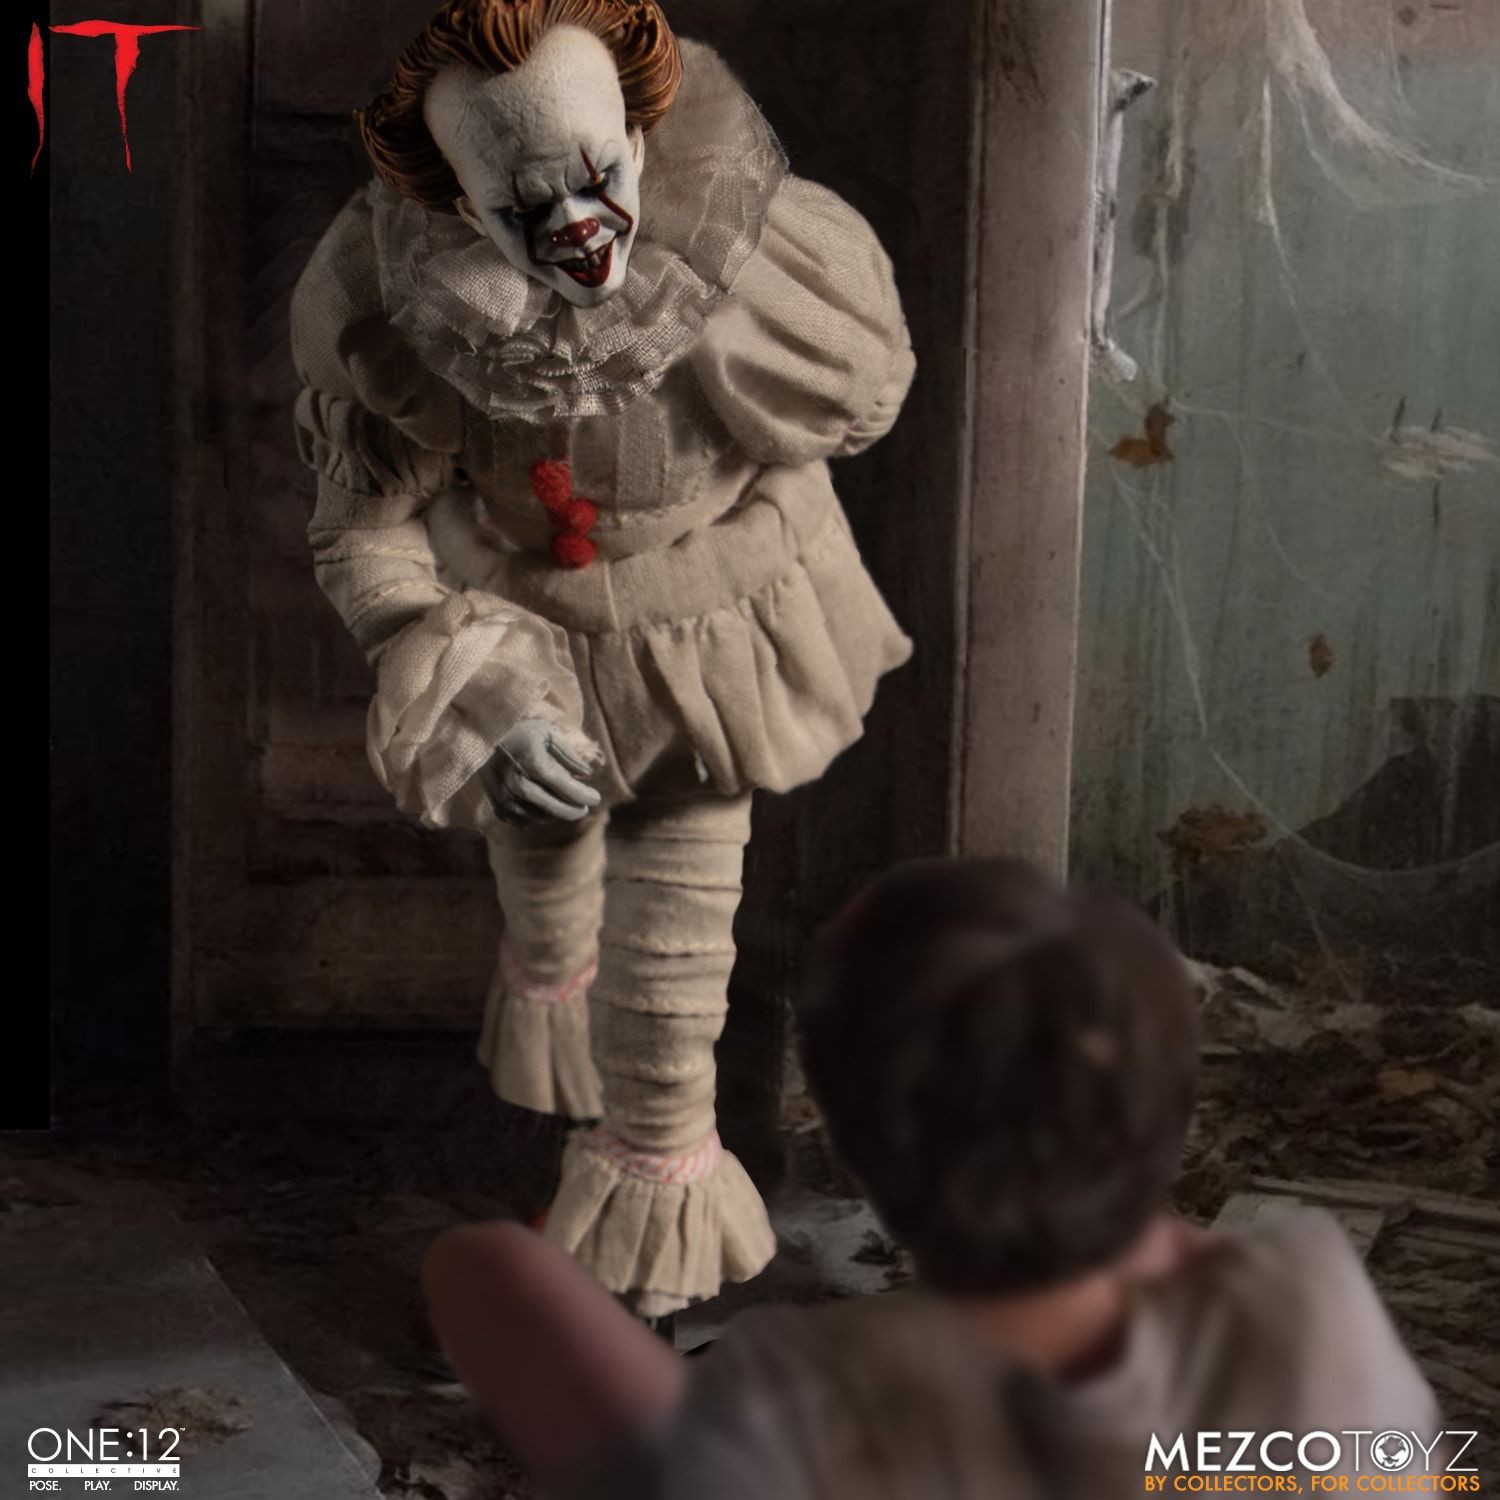 Mezco - One:12 Collective - IT (2017) - Pennywise - Marvelous Toys